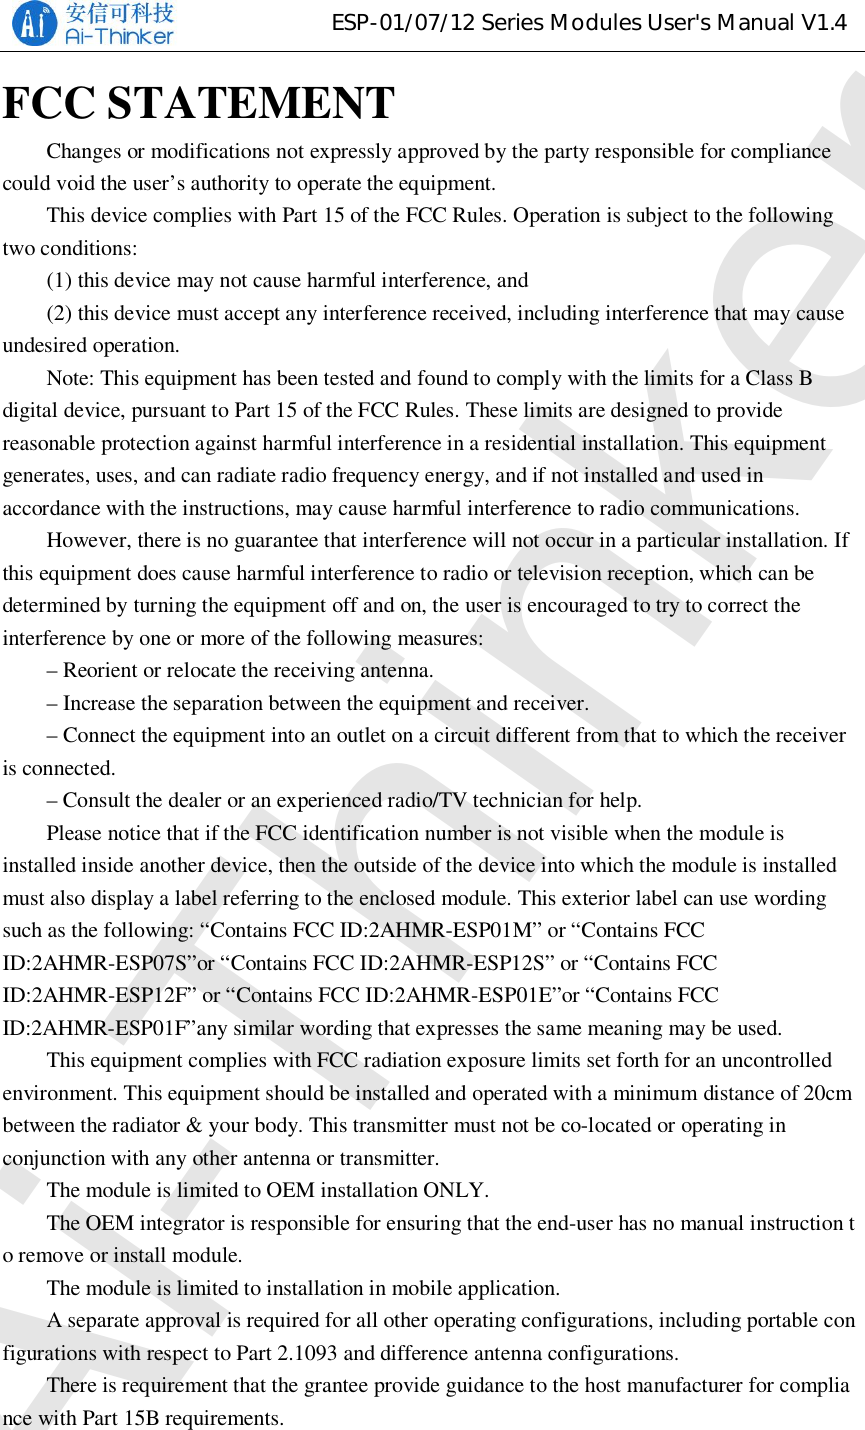 ESP-01/07/12 Series Modules User&apos;s Manual V1.4FCC STATEMENTChanges or modifications not expressly approved by the party responsible for compliancecould void the user’s authority to operate the equipment.This device complies with Part 15 of the FCC Rules. Operation is subject to the followingtwo conditions:(1) this device may not cause harmful interference, and(2) this device must accept any interference received, including interference that may causeundesired operation.Note: This equipment has been tested and found to comply with the limits for a Class Bdigital device, pursuant to Part 15 of the FCC Rules. These limits are designed to providereasonable protection against harmful interference in a residential installation. This equipmentgenerates, uses, and can radiate radio frequency energy, and if not installed and used inaccordance with the instructions, may cause harmful interference to radio communications.However, there is no guarantee that interference will not occur in a particular installation. Ifthis equipment does cause harmful interference to radio or television reception, which can bedetermined by turning the equipment off and on, the user is encouraged to try to correct theinterference by one or more of the following measures:– Reorient or relocate the receiving antenna.– Increase the separation between the equipment and receiver.– Connect the equipment into an outlet on a circuit different from that to which the receiveris connected.– Consult the dealer or an experienced radio/TV technician for help.Please notice that if the FCC identification number is not visible when the module isinstalled inside another device, then the outside of the device into which the module is installedmust also display a label referring to the enclosed module. This exterior label can use wordingsuch as the following: “Contains FCC ID:2AHMR-ESP01M” or “Contains FCCID:2AHMR-ESP07S”or “Contains FCC ID:2AHMR-ESP12S” or “Contains FCCID:2AHMR-ESP12F” or “Contains FCC ID:2AHMR-ESP01E”or “Contains FCCID:2AHMR-ESP01F”any similar wording that expresses the same meaning may be used.This equipment complies with FCC radiation exposure limits set forth for an uncontrolledenvironment. This equipment should be installed and operated with a minimum distance of 20cmbetween the radiator &amp; your body. This transmitter must not be co-located or operating inconjunction with any other antenna or transmitter.The module is limited to OEM installation ONLY.The OEM integrator is responsible for ensuring that the end-user has no manual instruction to remove or install module.The module is limited to installation in mobile application.A separate approval is required for all other operating configurations, including portable configurations with respect to Part 2.1093 and difference antenna configurations.There is requirement that the grantee provide guidance to the host manufacturer for compliance with Part 15B requirements.Ai-Thinker